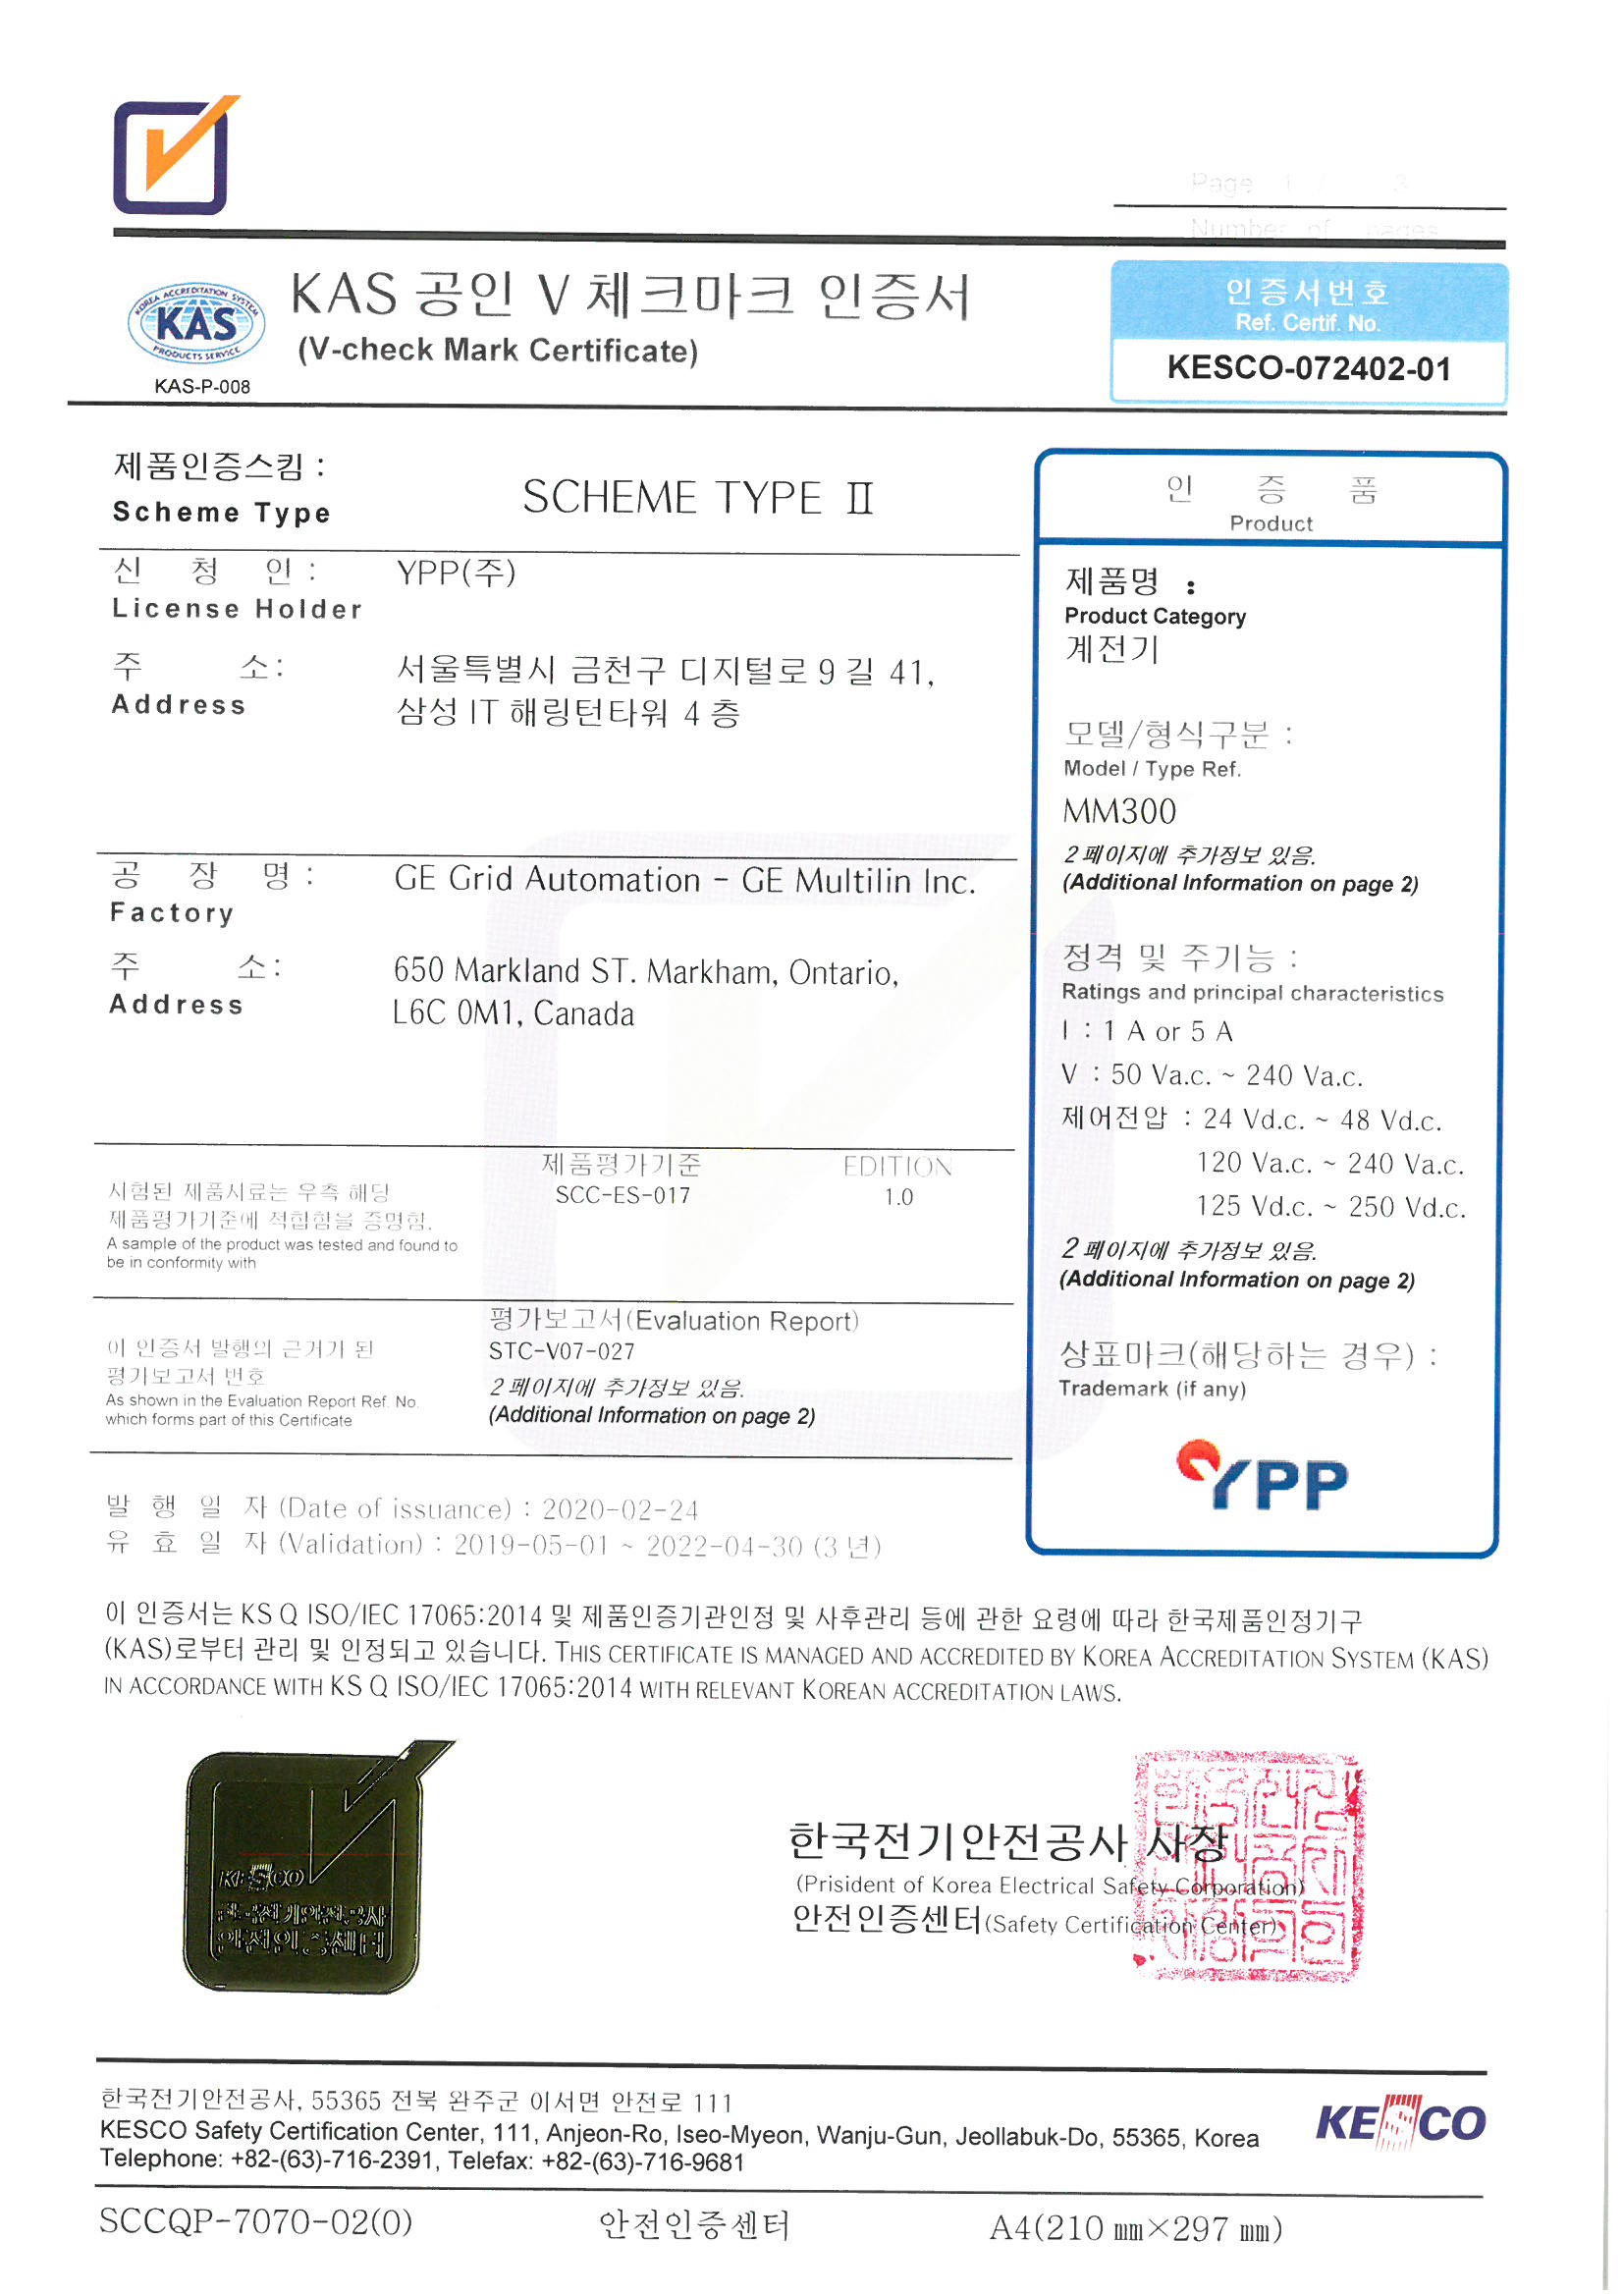 V-Check certification from Korea Electrical Safety Corporation_4.jpg